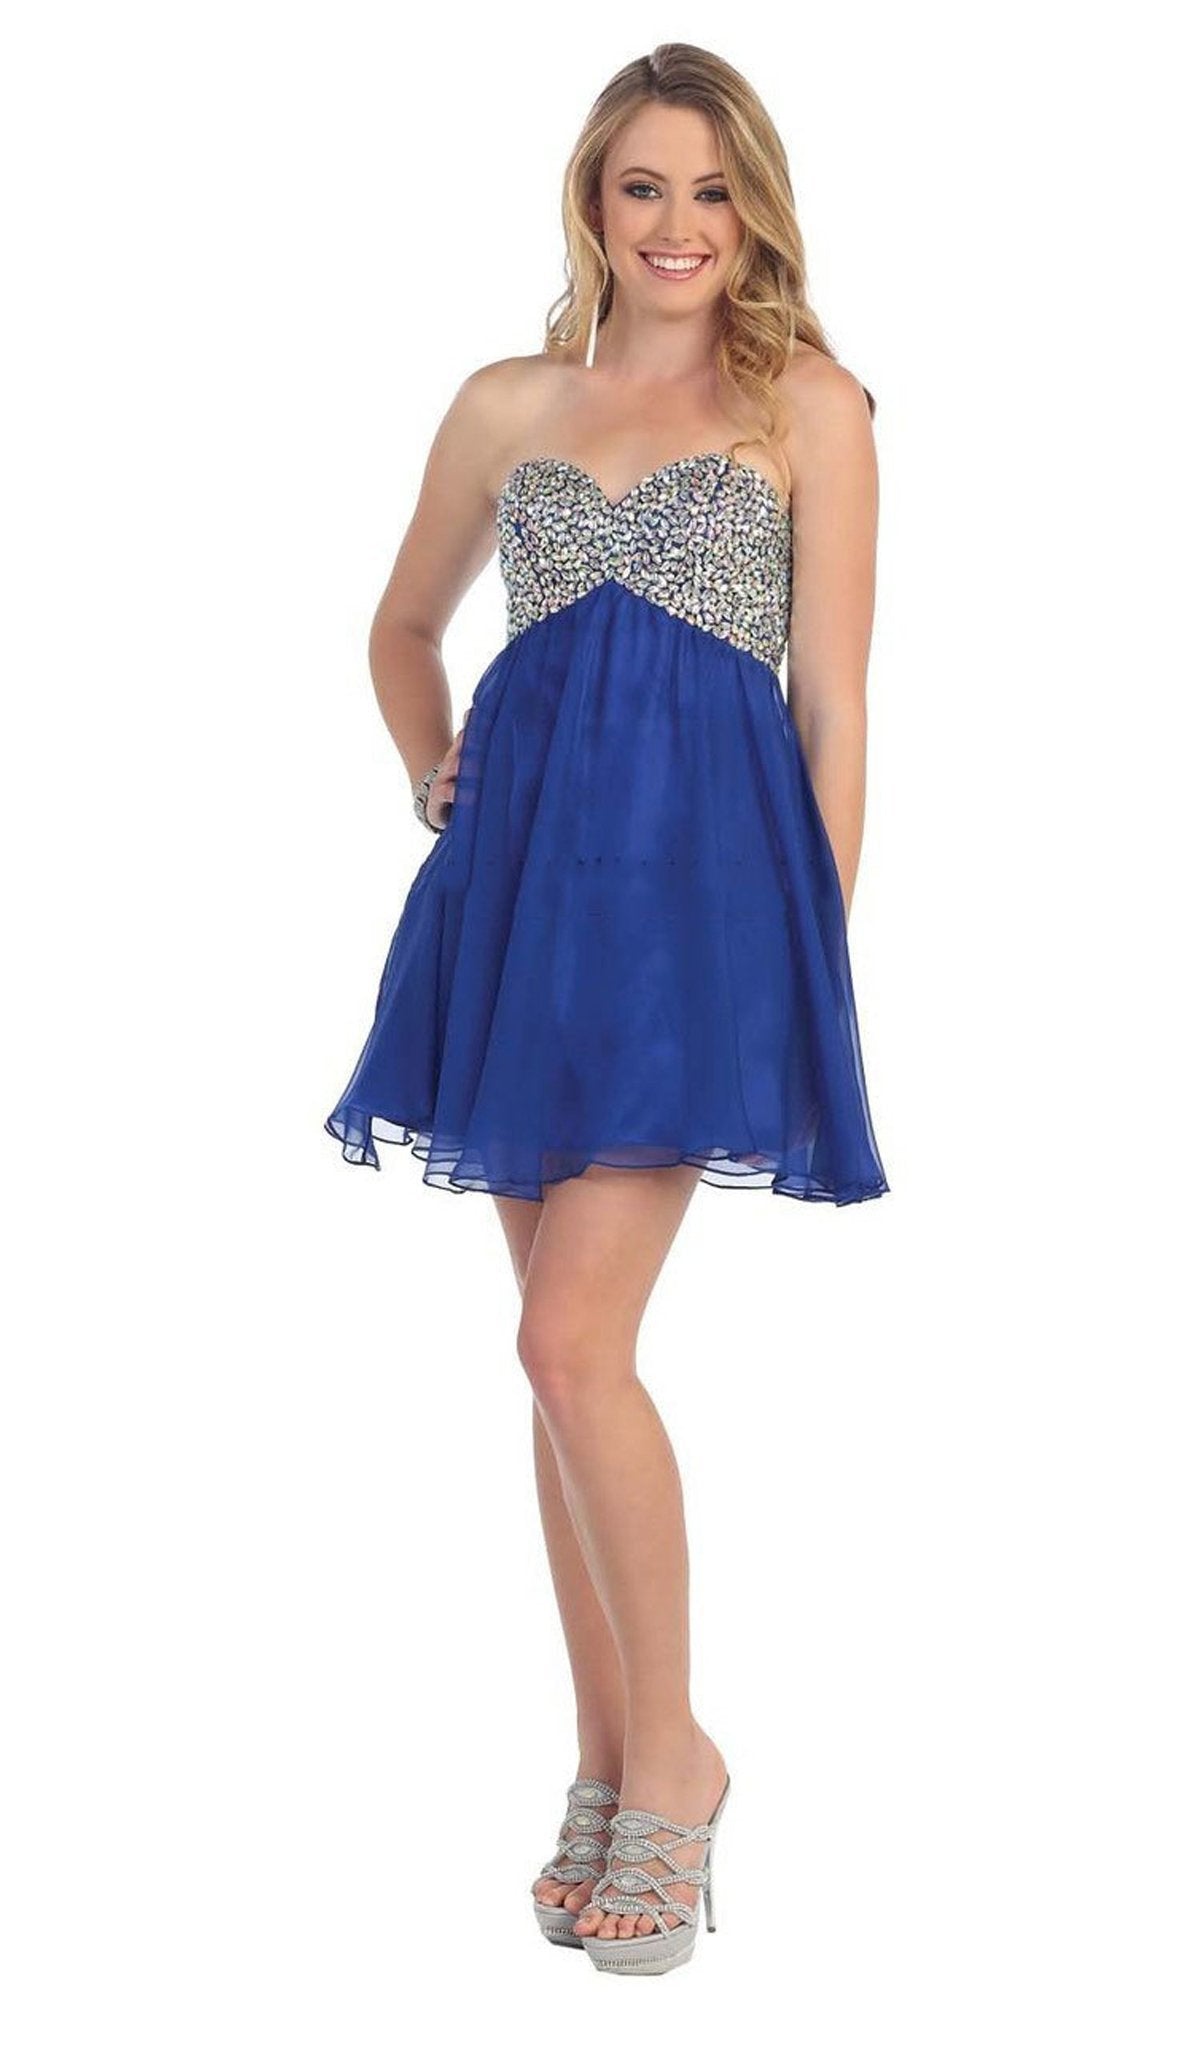 May Queen - Crystal Encrusted Bust Sweetheart Cocktail Dress Special Occasion Dress 4 / Royal-Blue